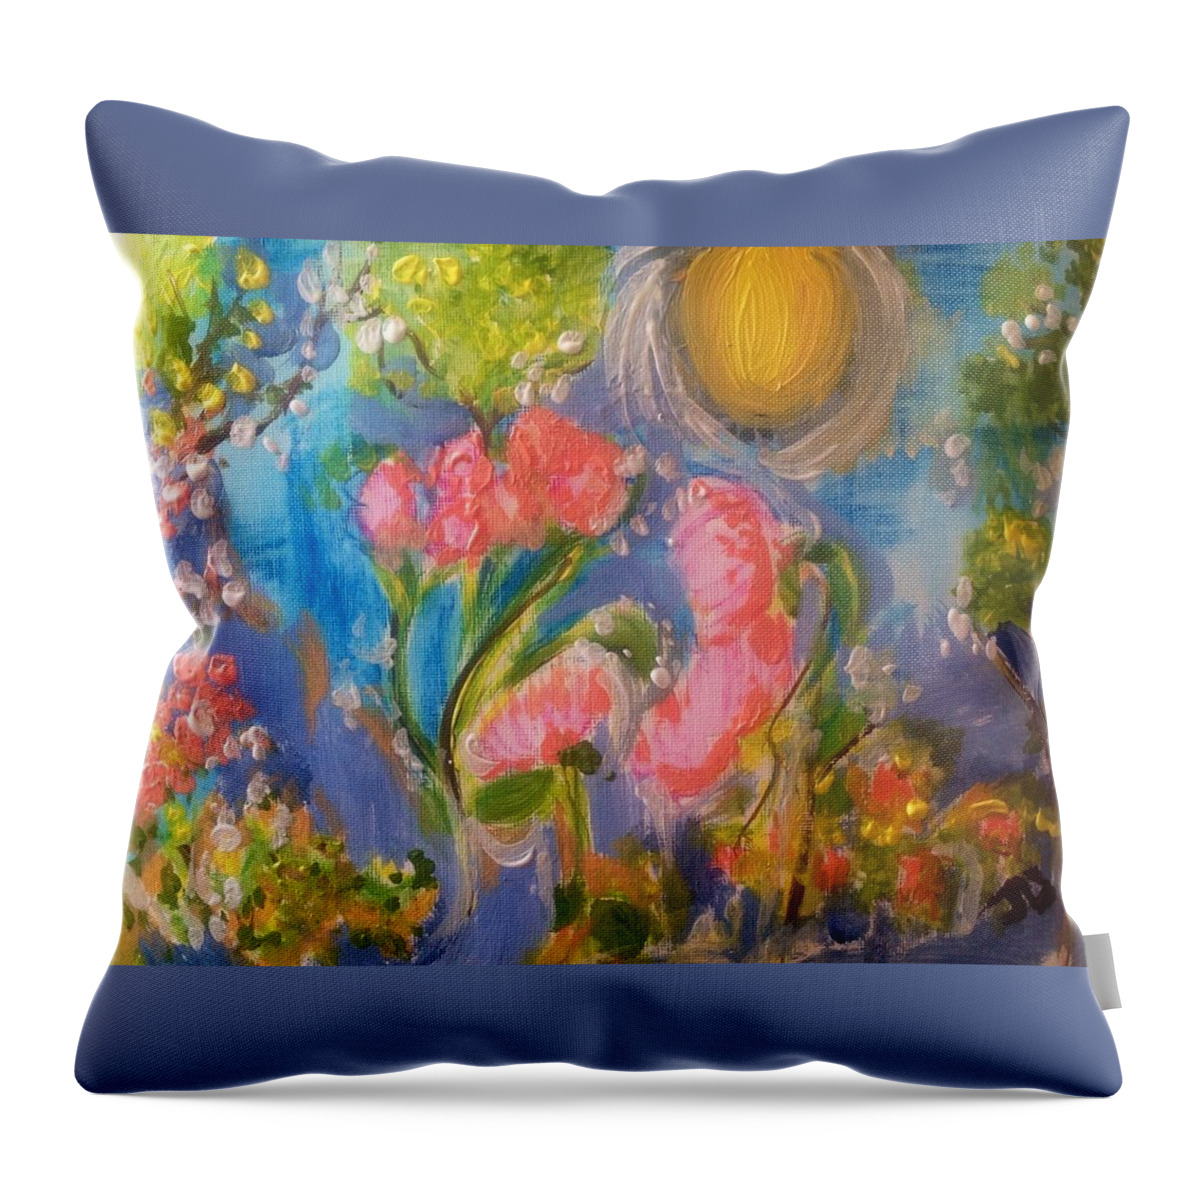 Sun Throw Pillow featuring the painting Breathing in the sunlight by Judith Desrosiers